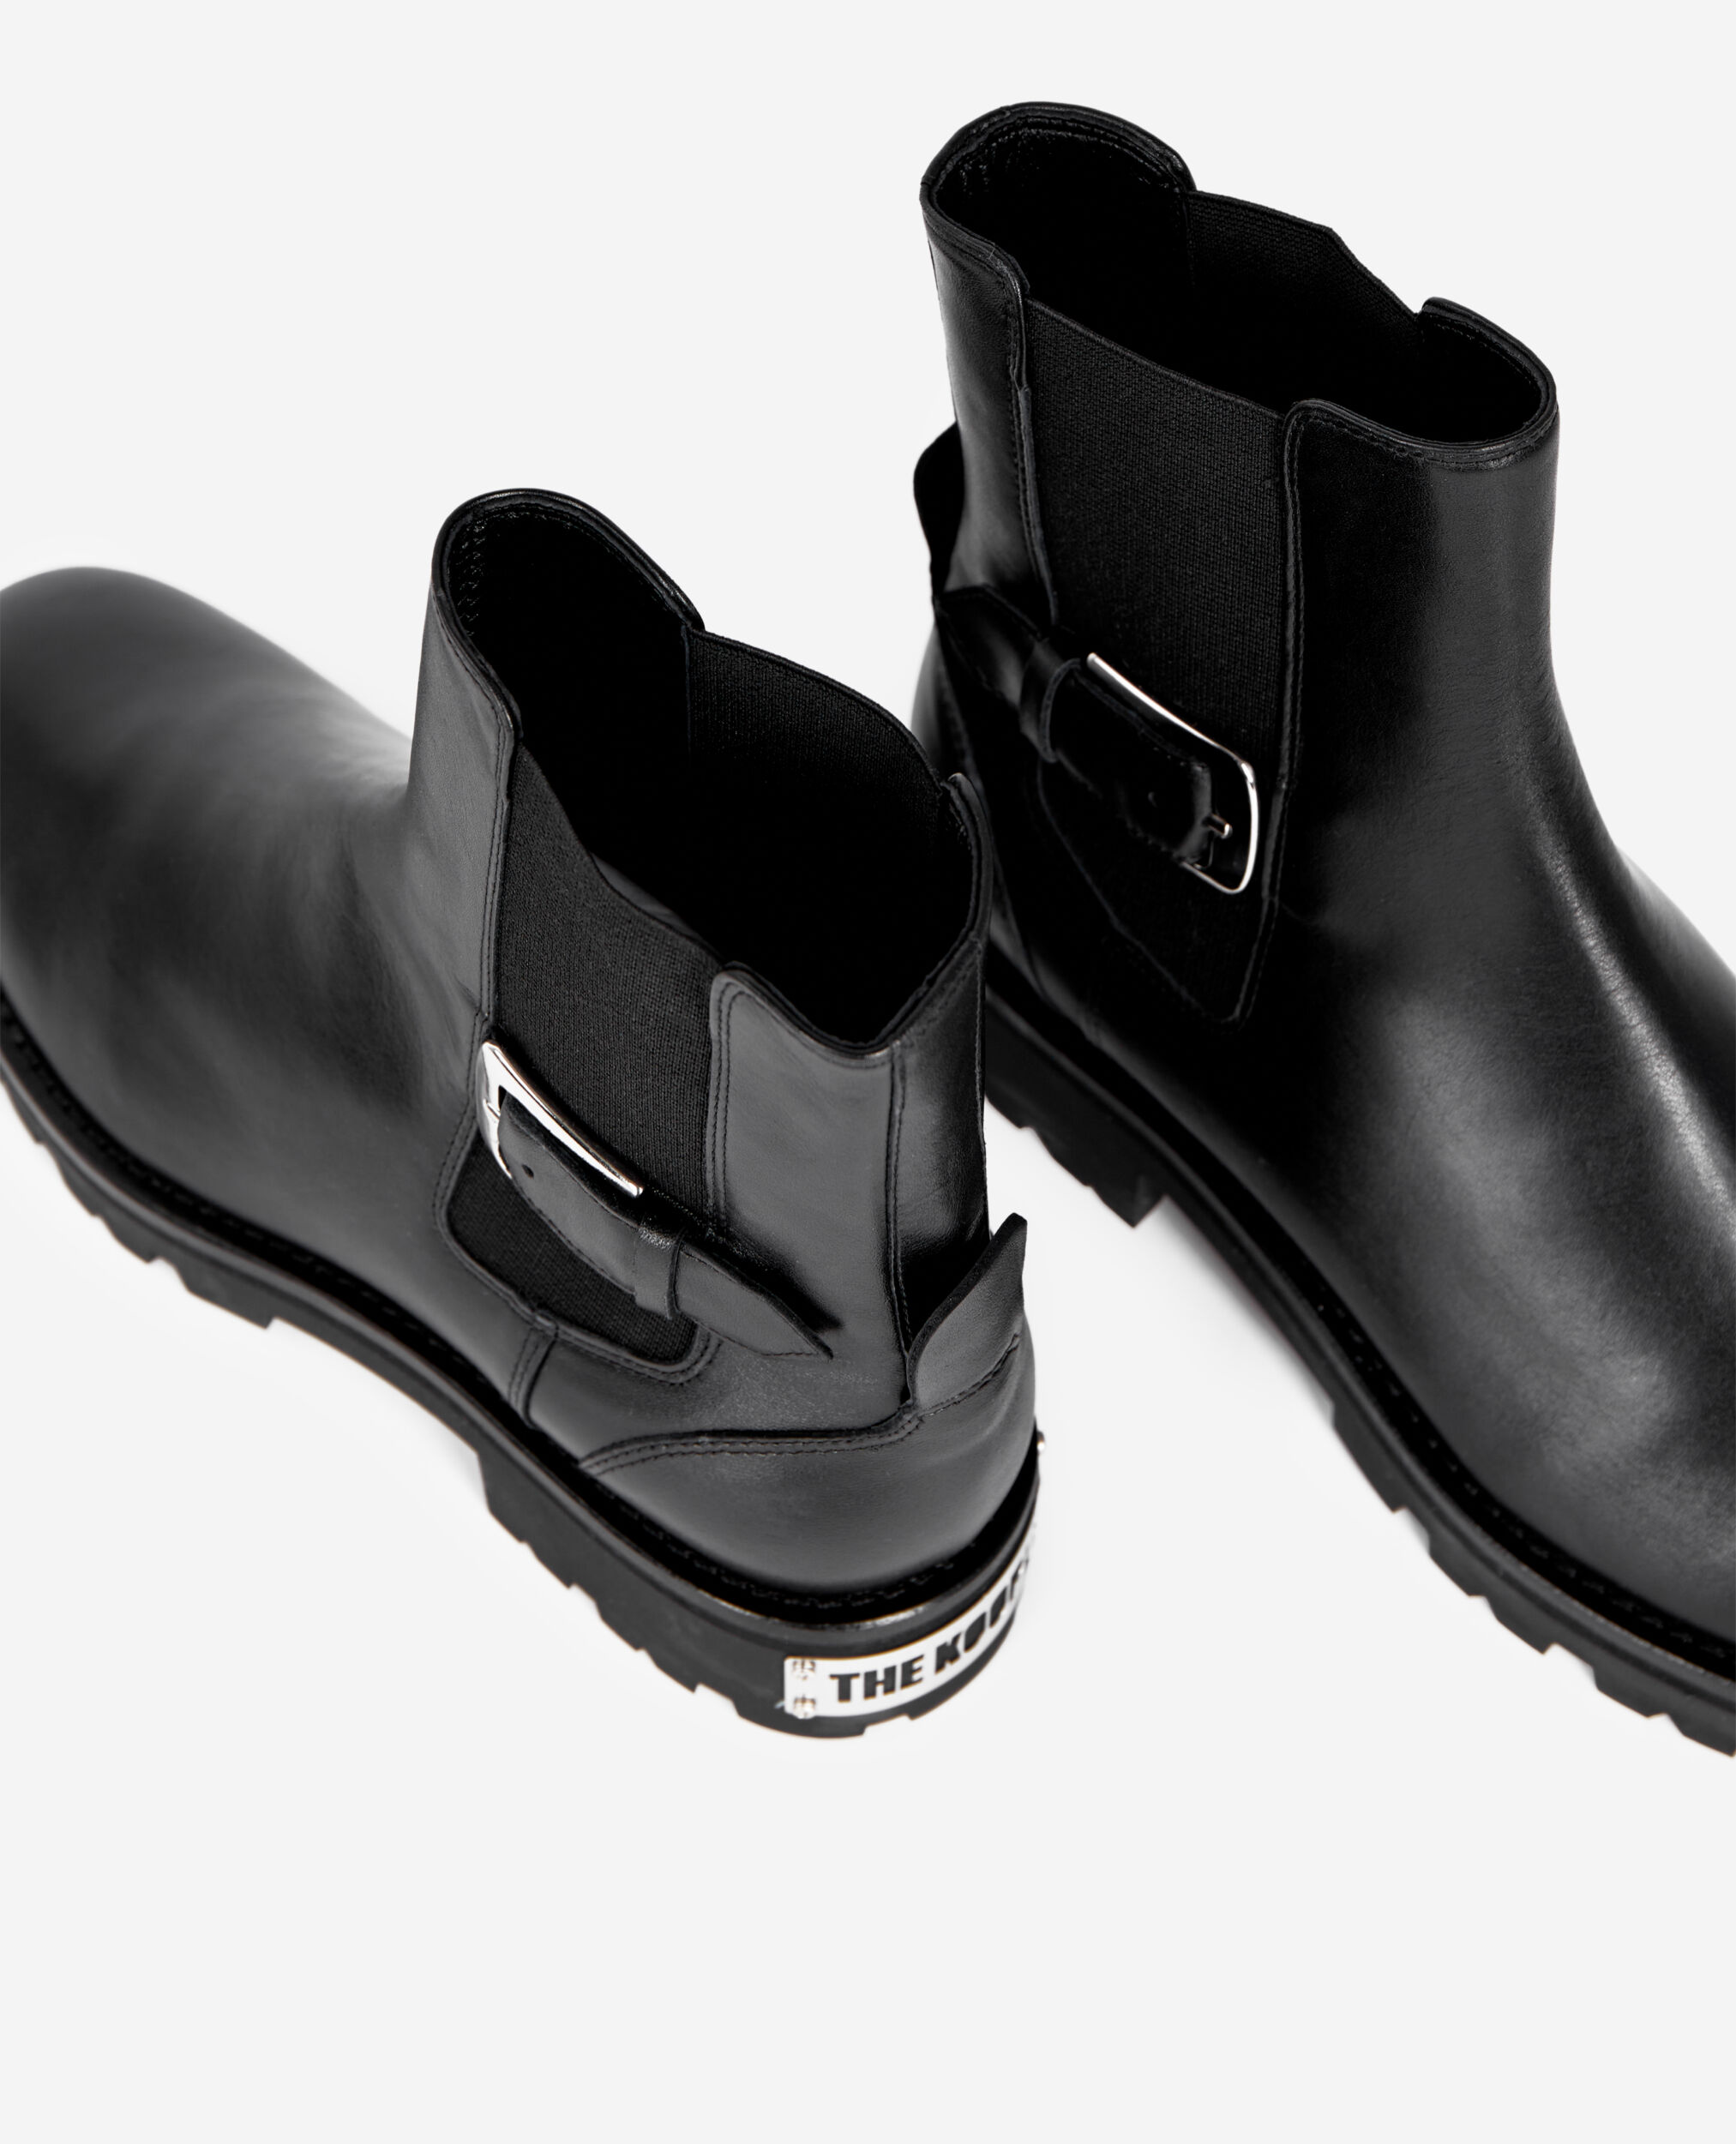 Chelsea boots in black leather, BLACK, hi-res image number null